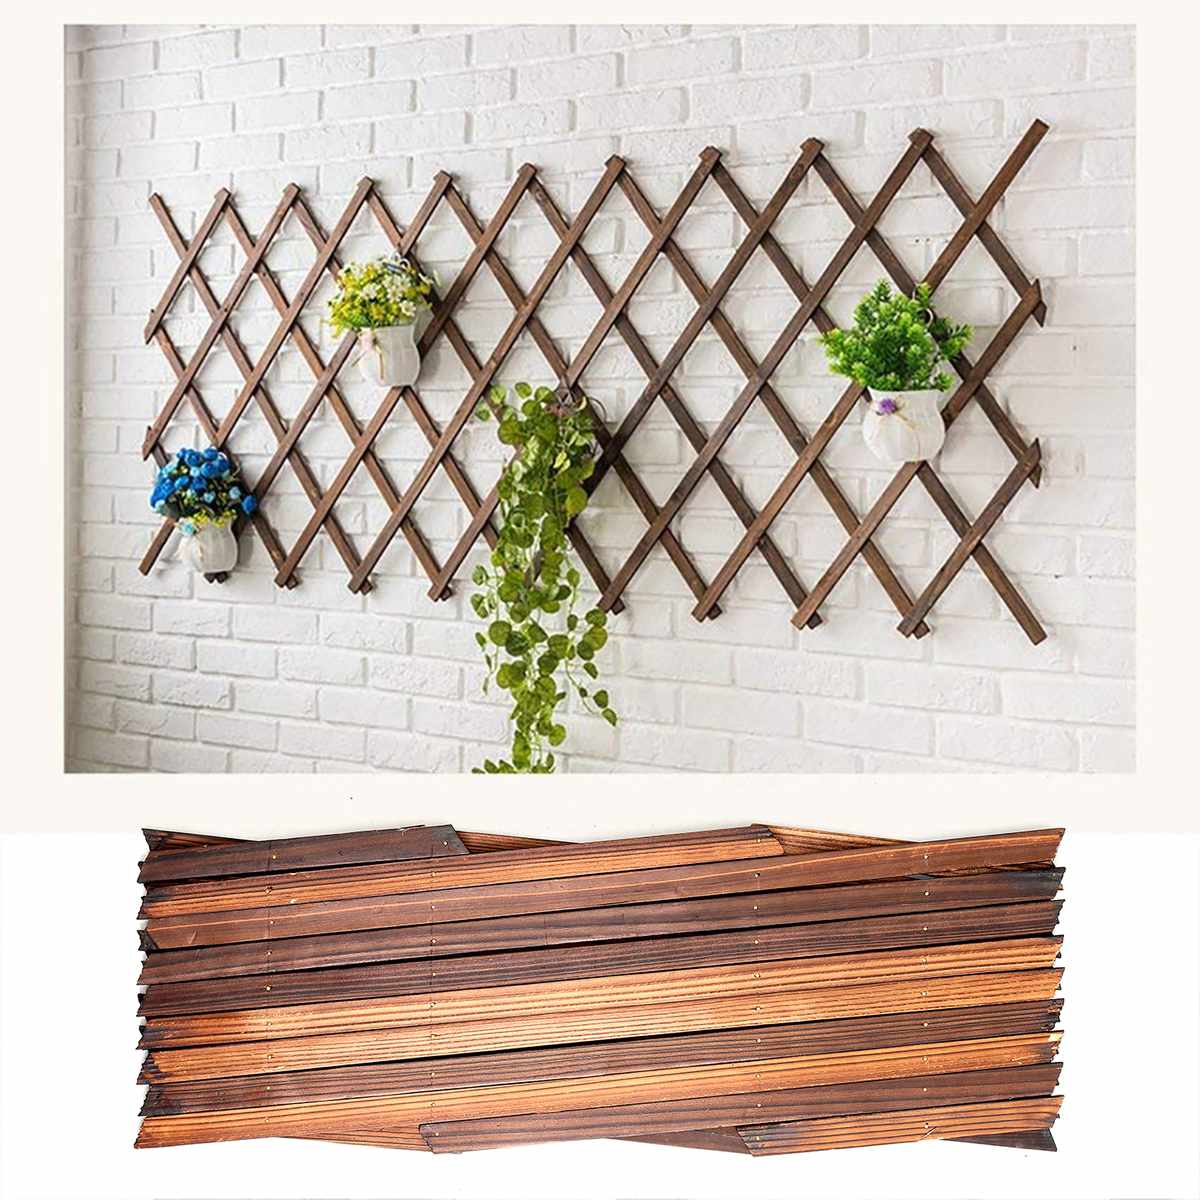 Carbonized Anticorrosive Wood Pull Net Garden Wall Fence Panel Plant Climb Trellis Support Decorative Garden Fence for Home Yard